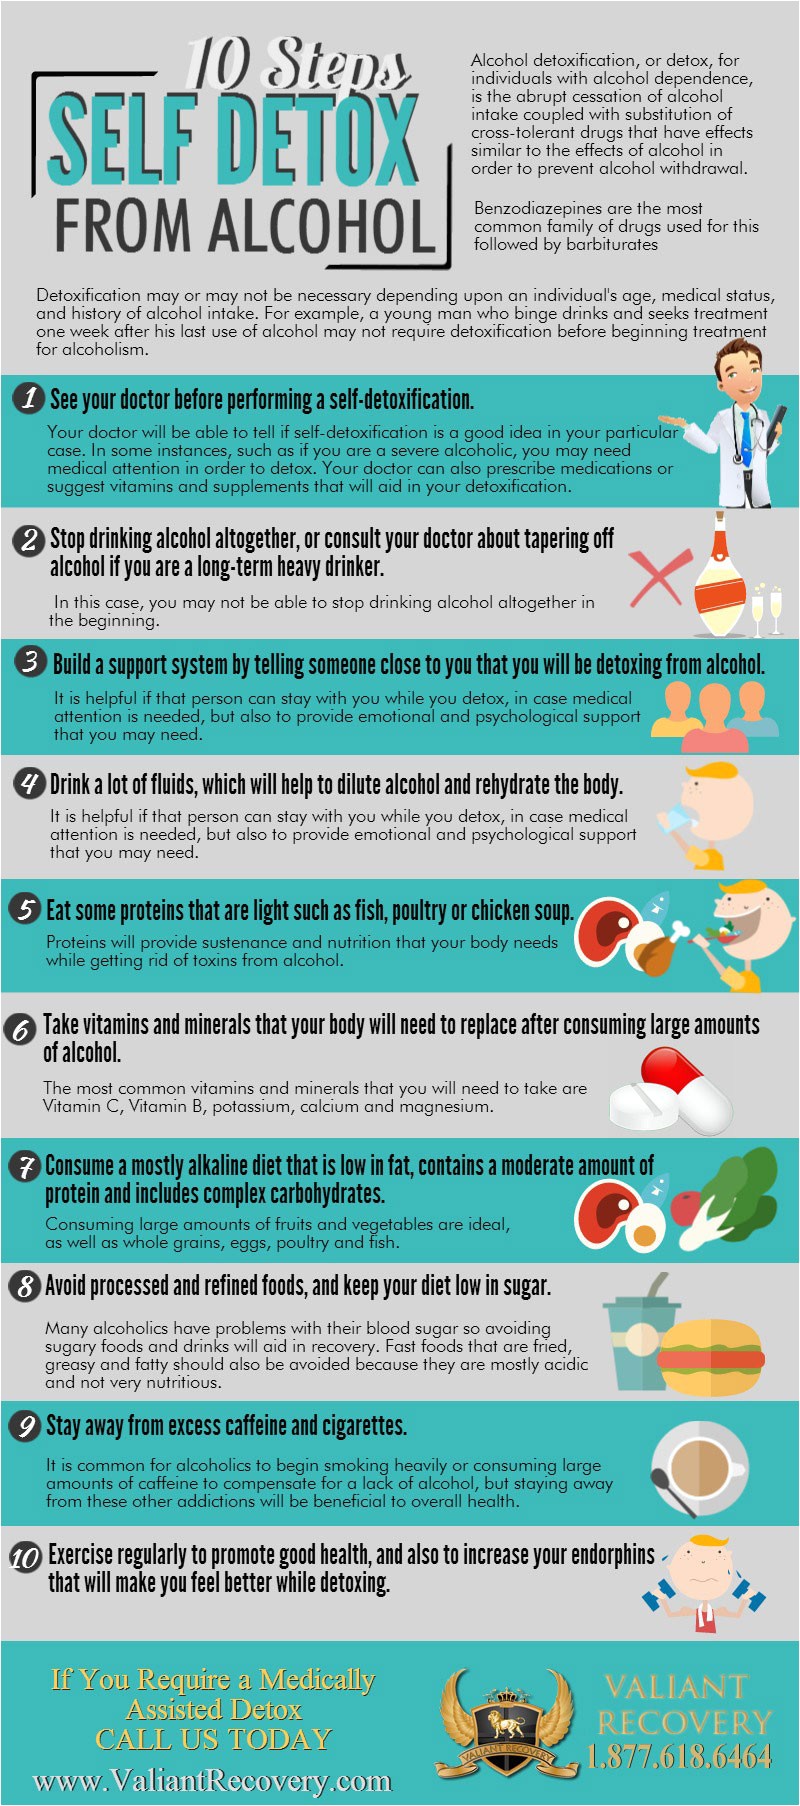 10 steps self detox from alcohol